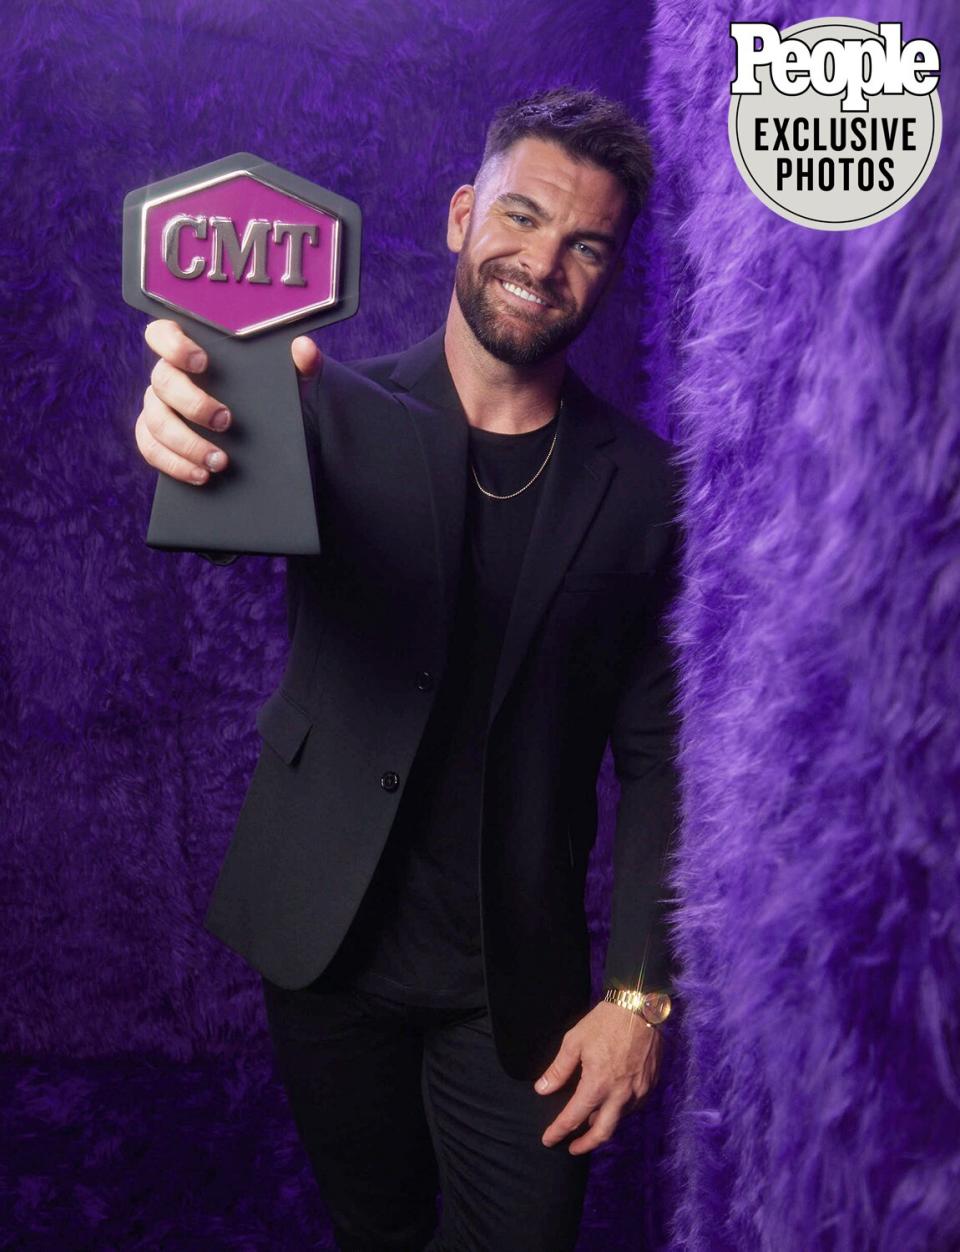 CMT 2021 Photo Booth